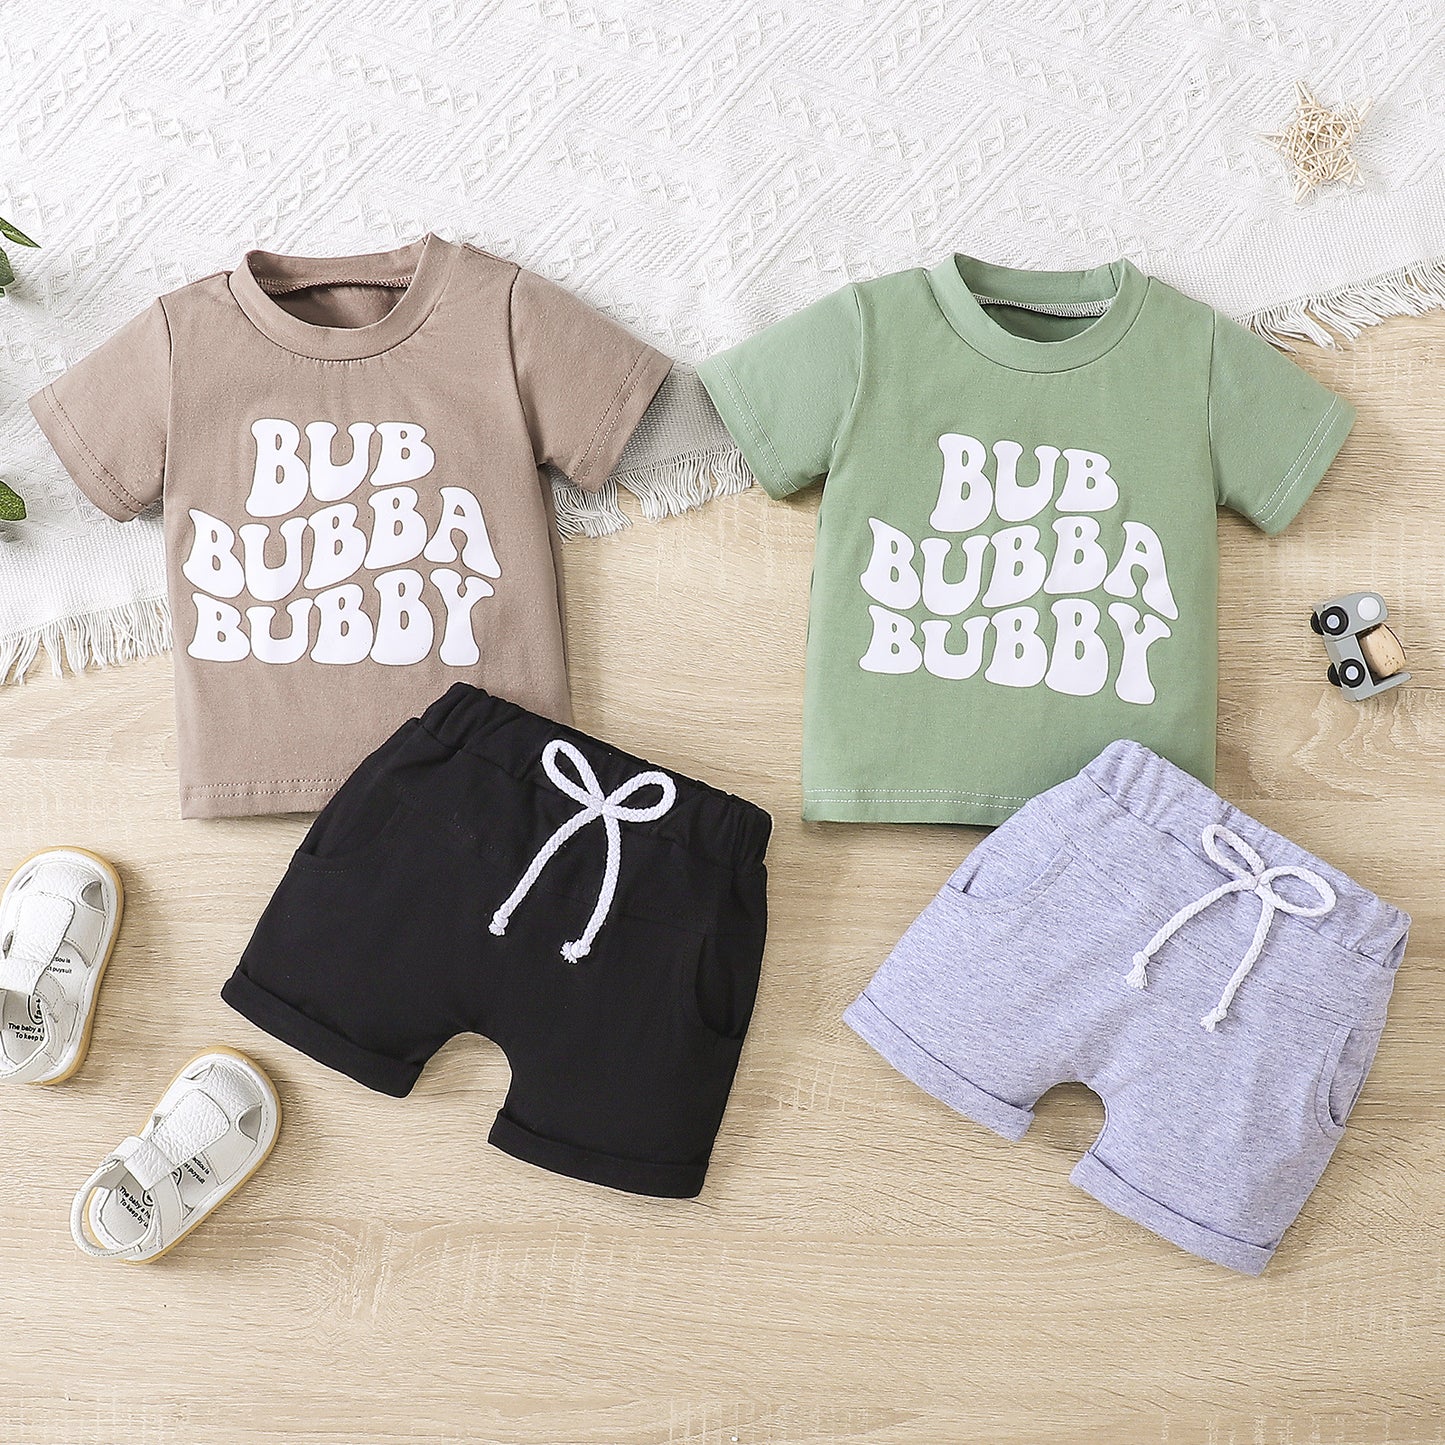 Boys' Round Neck Solid Color Letter Print Short-sleeve Top Solid Color Drawstring Shorts